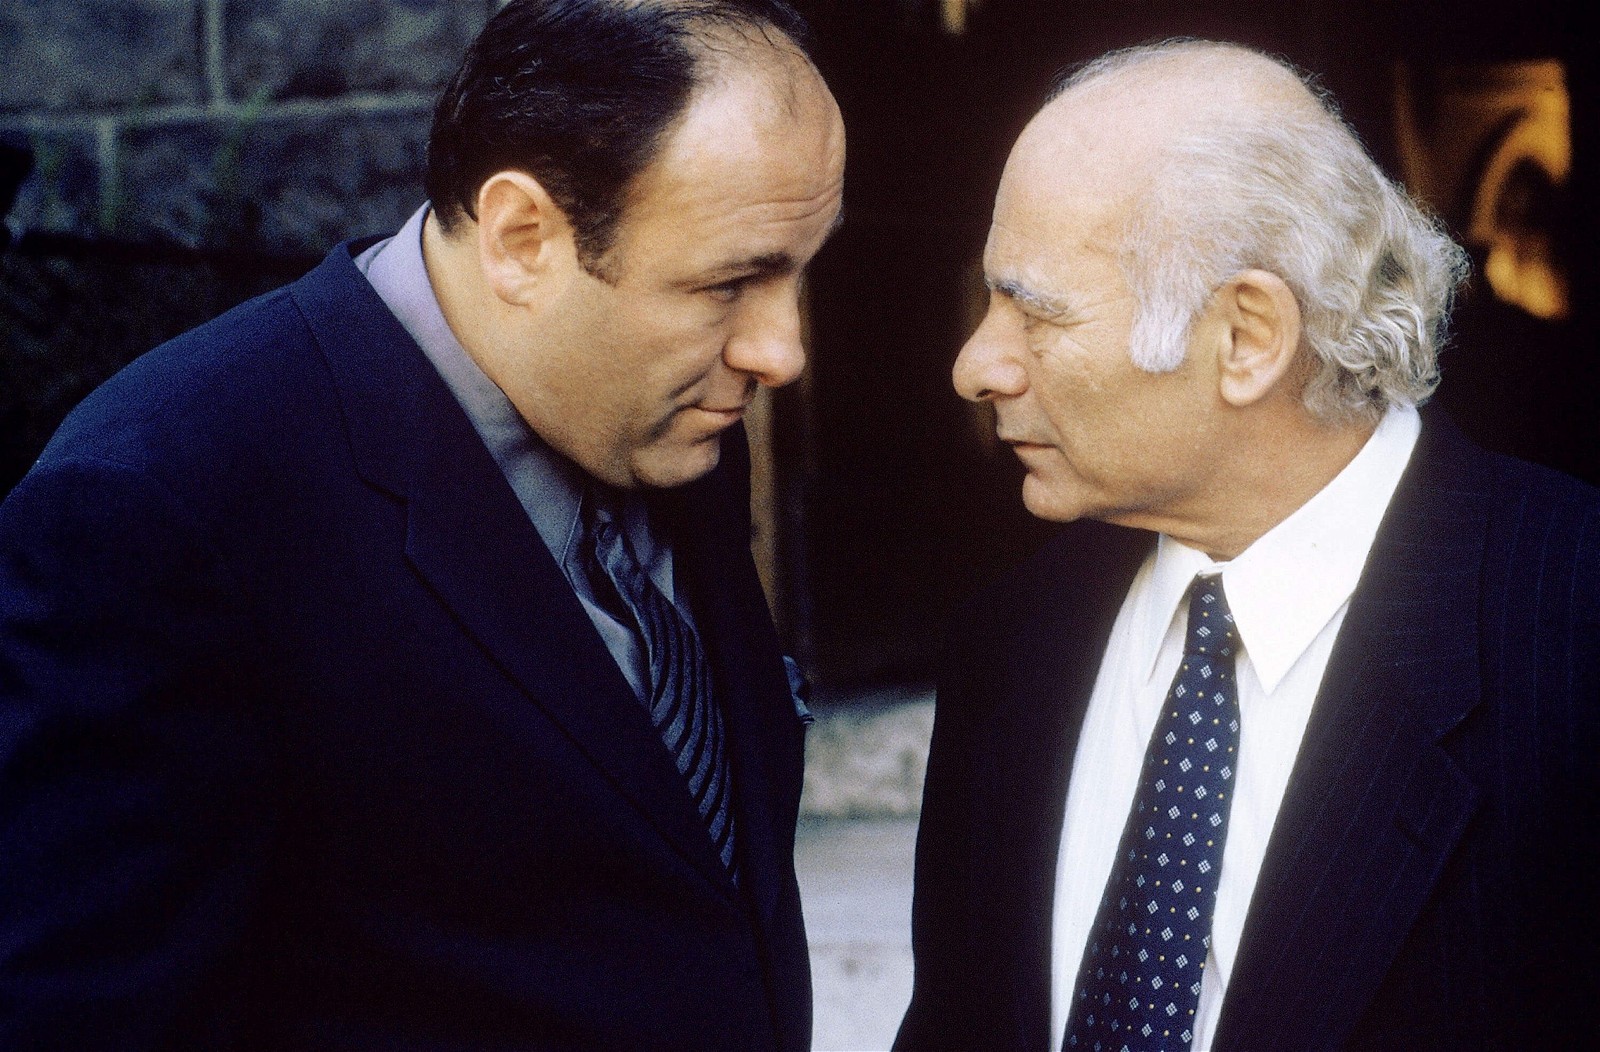 Burt Young in The Sopranos